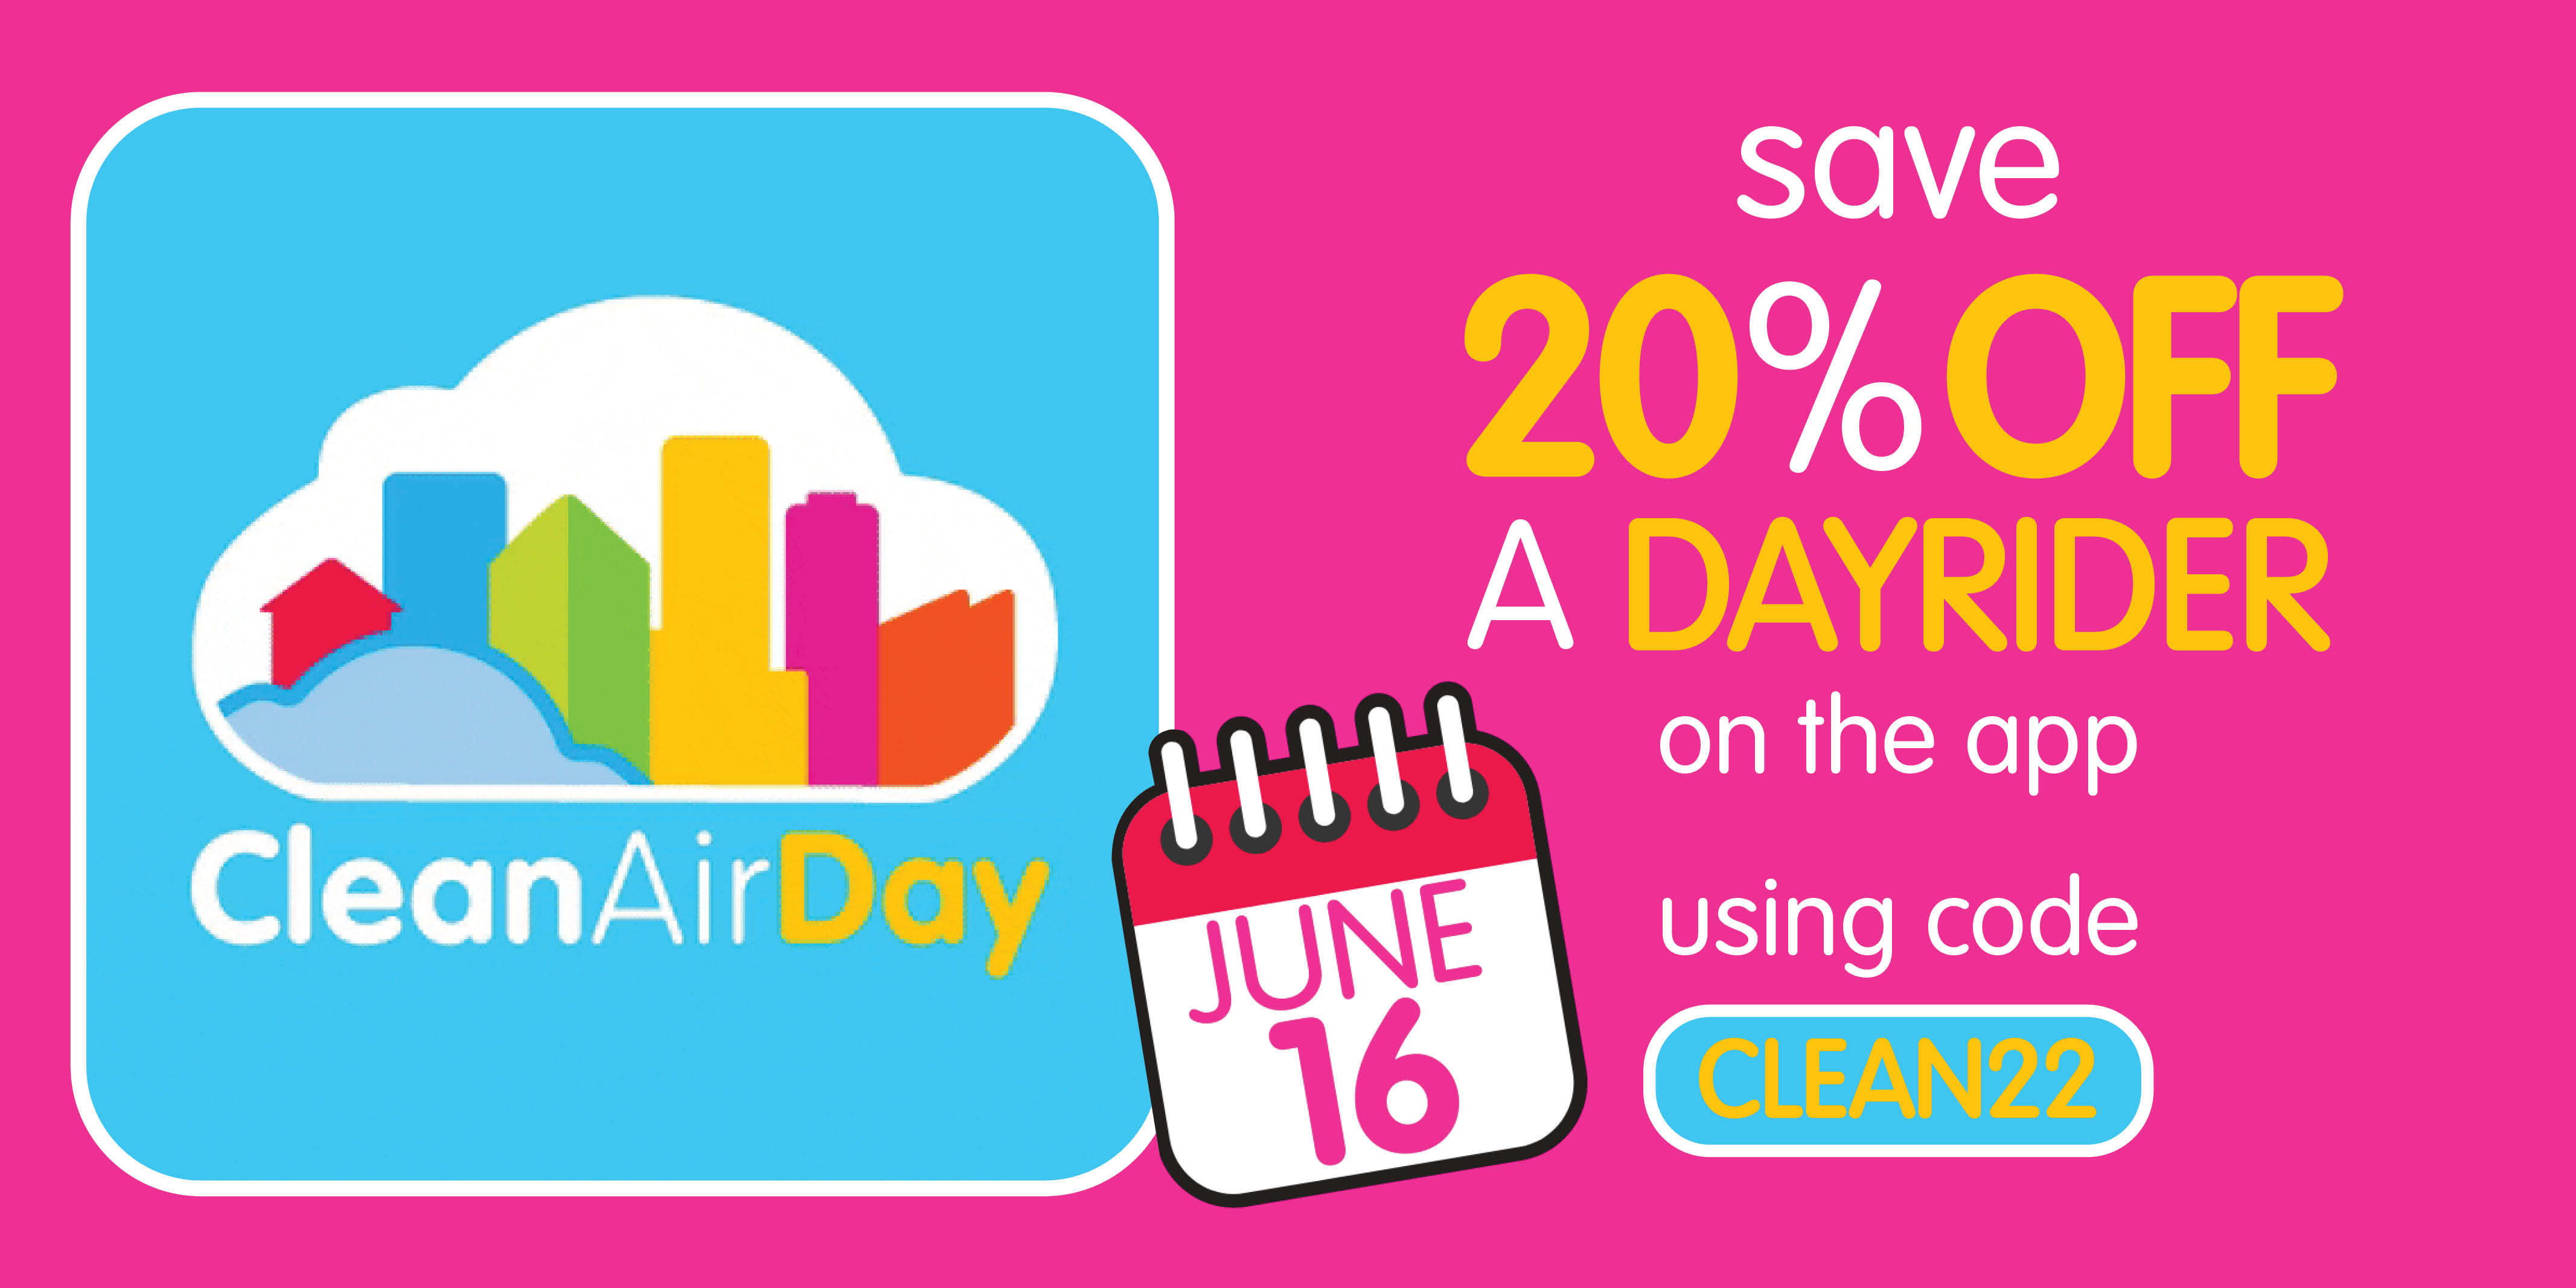 save 20% off a dayrider on the app for clean air day